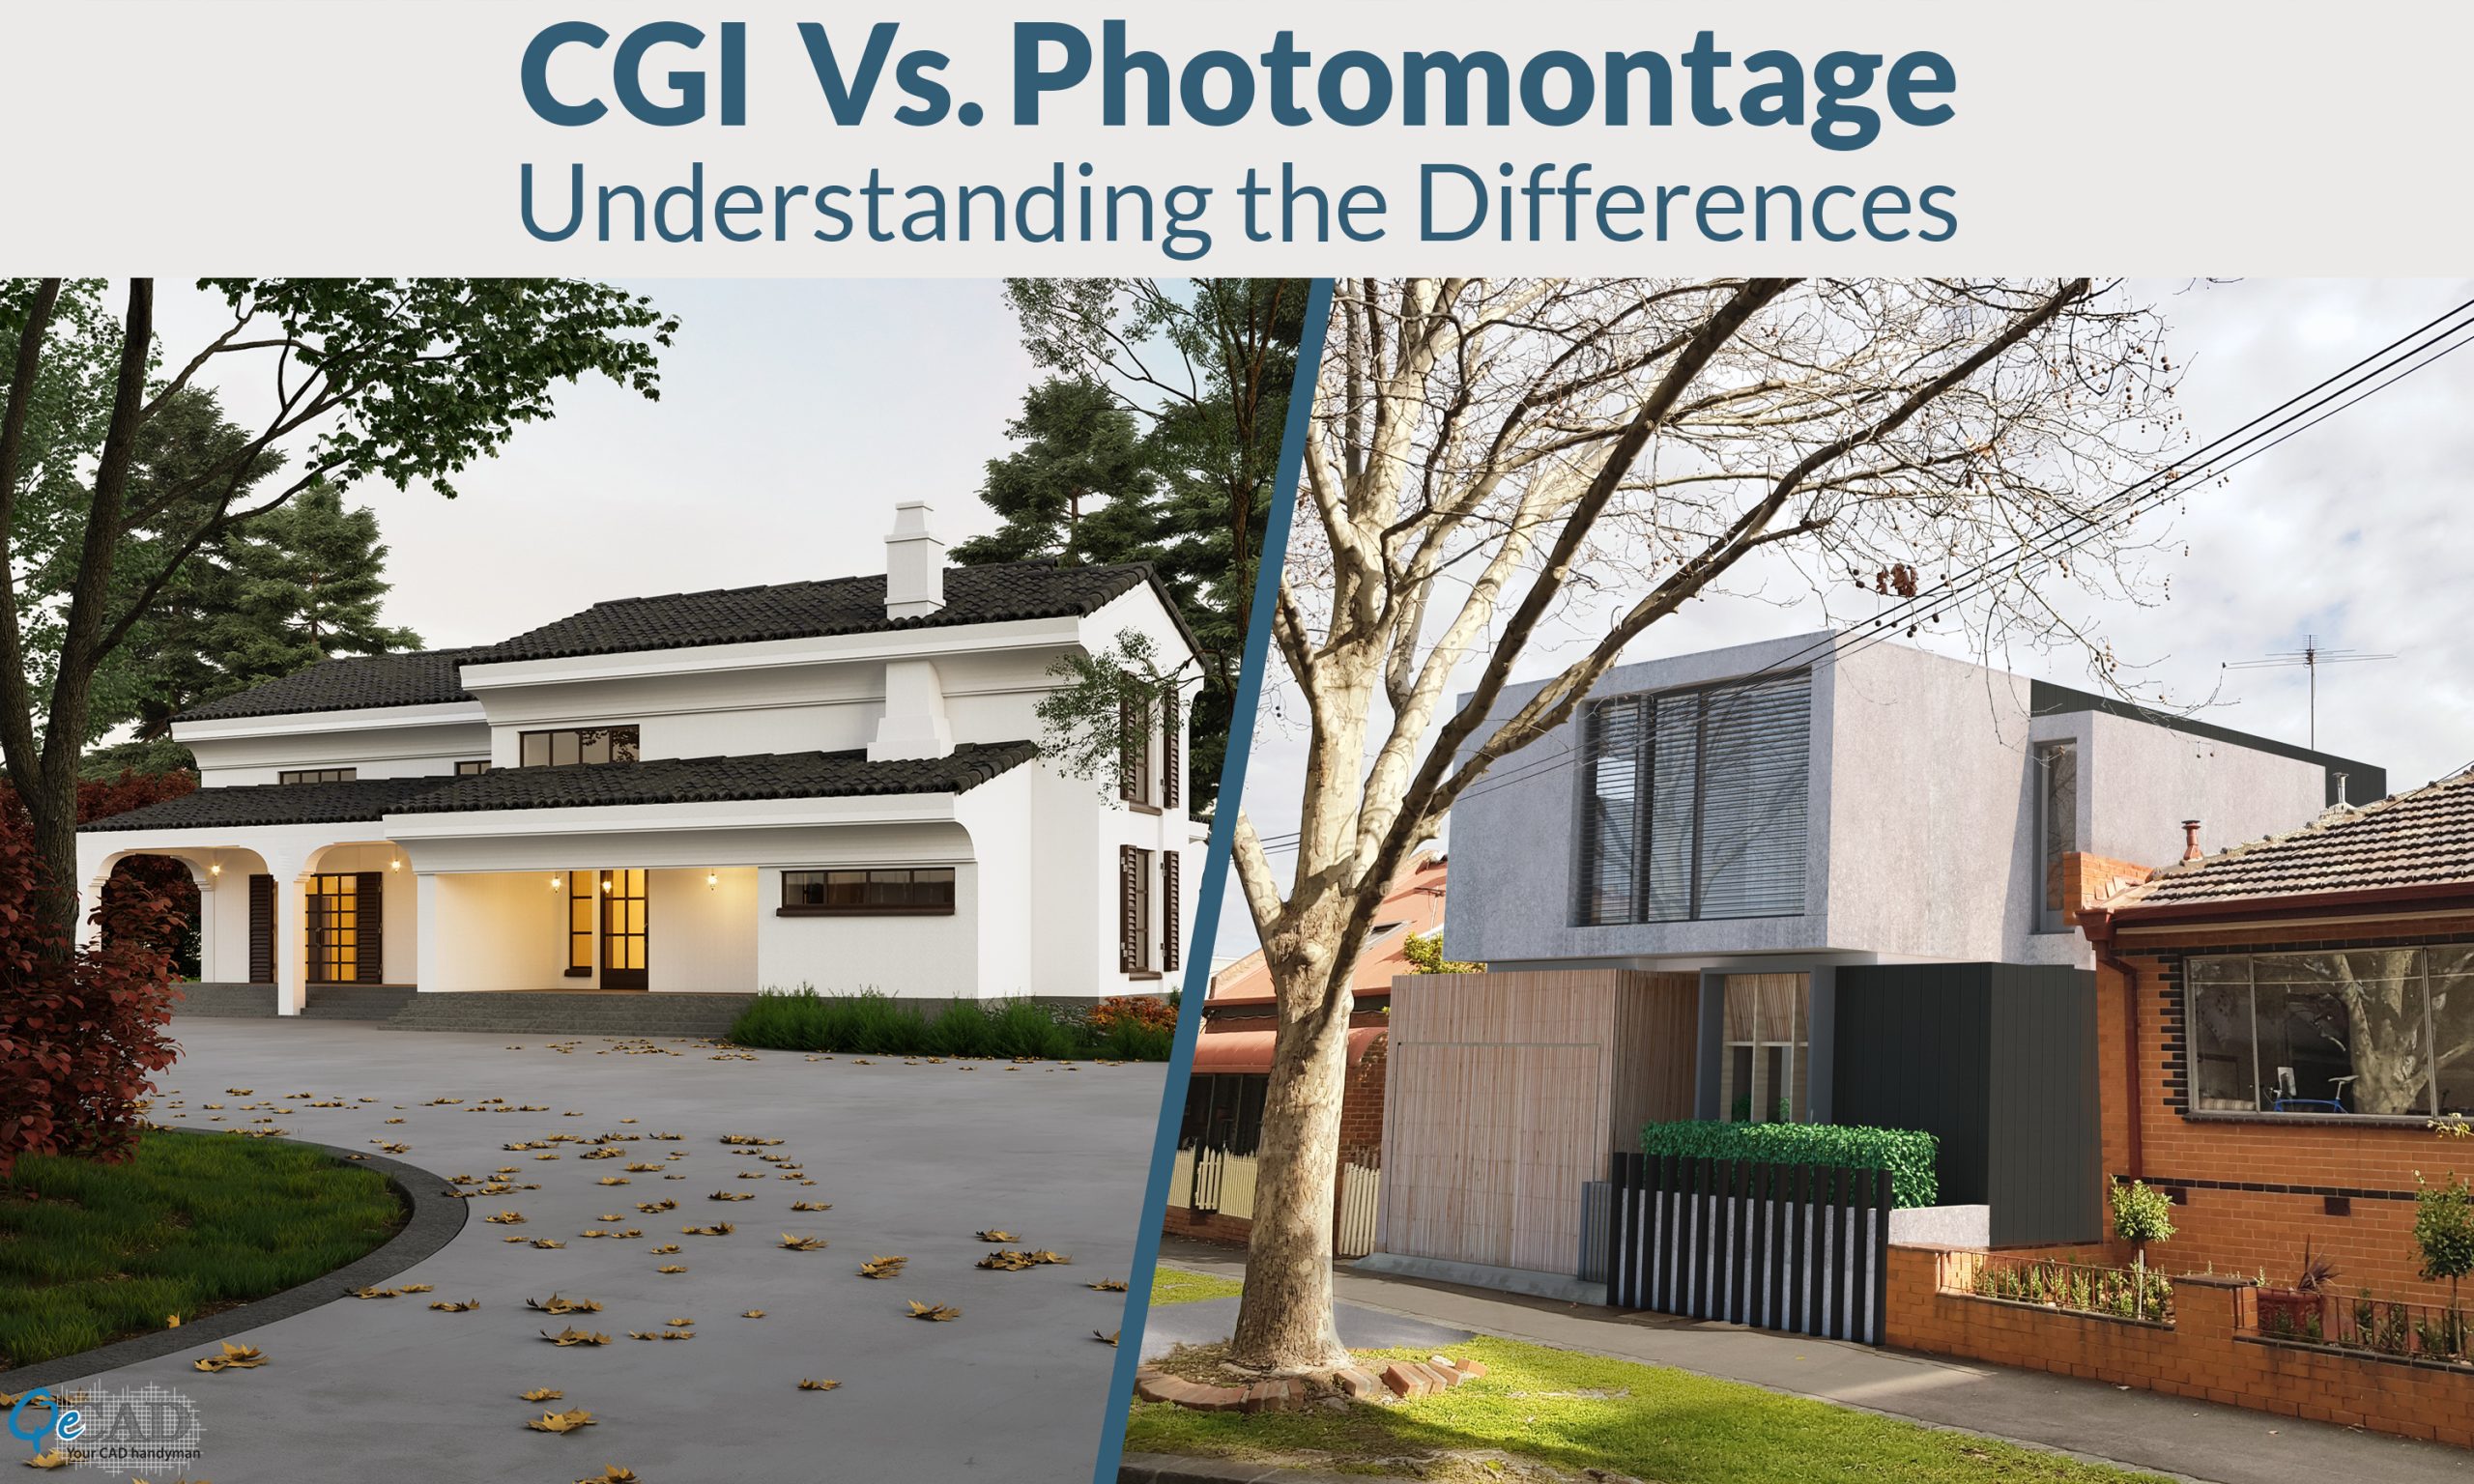 CGI Vs. Photomontage: Understanding the Differences